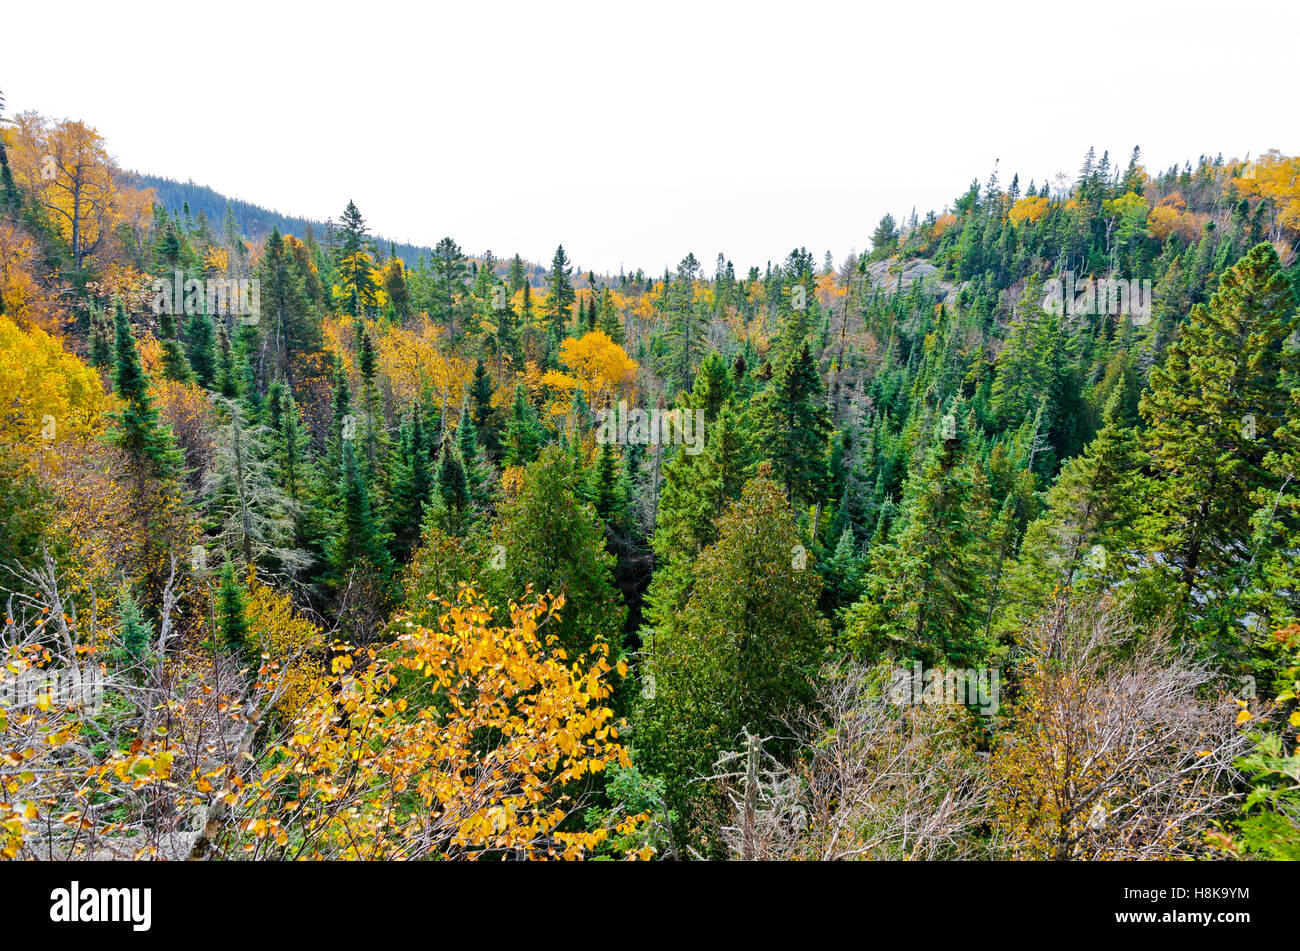 Fall's colorful trees in park near Superior Lake. Ontario, Canada Stock Photo